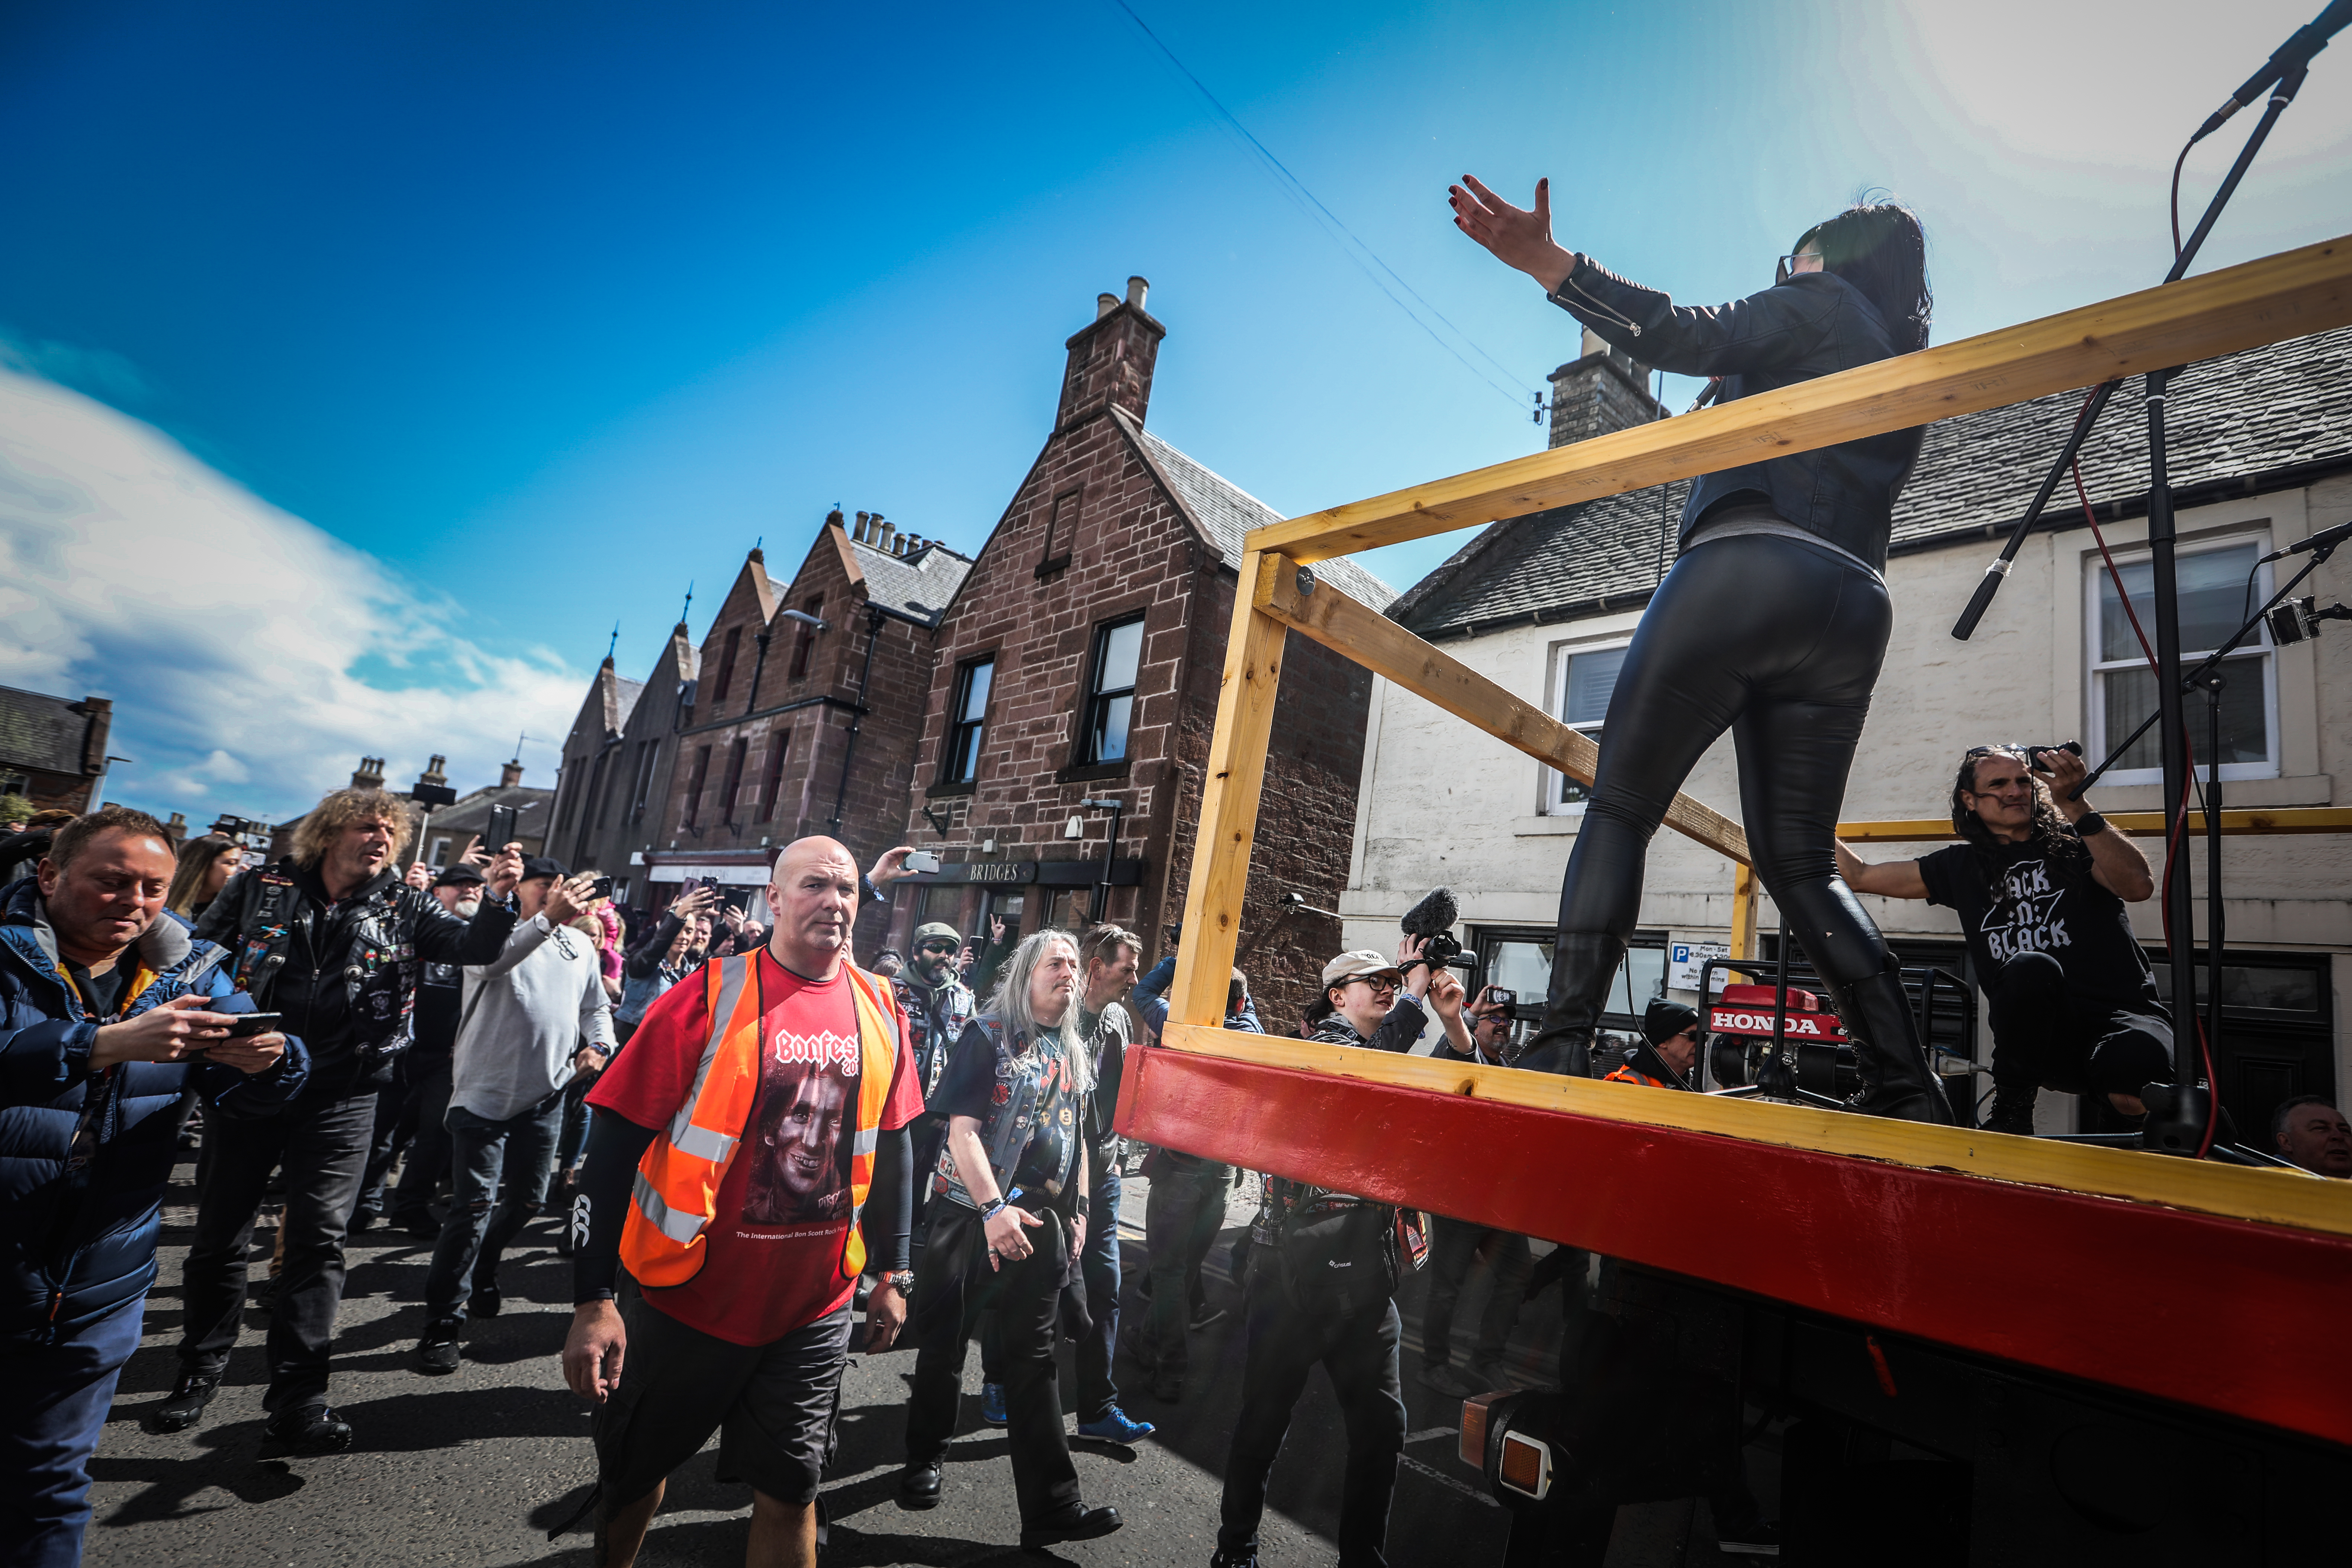 'Back N Black' on the 2019 Long Way To The top float which drives through the town centre.